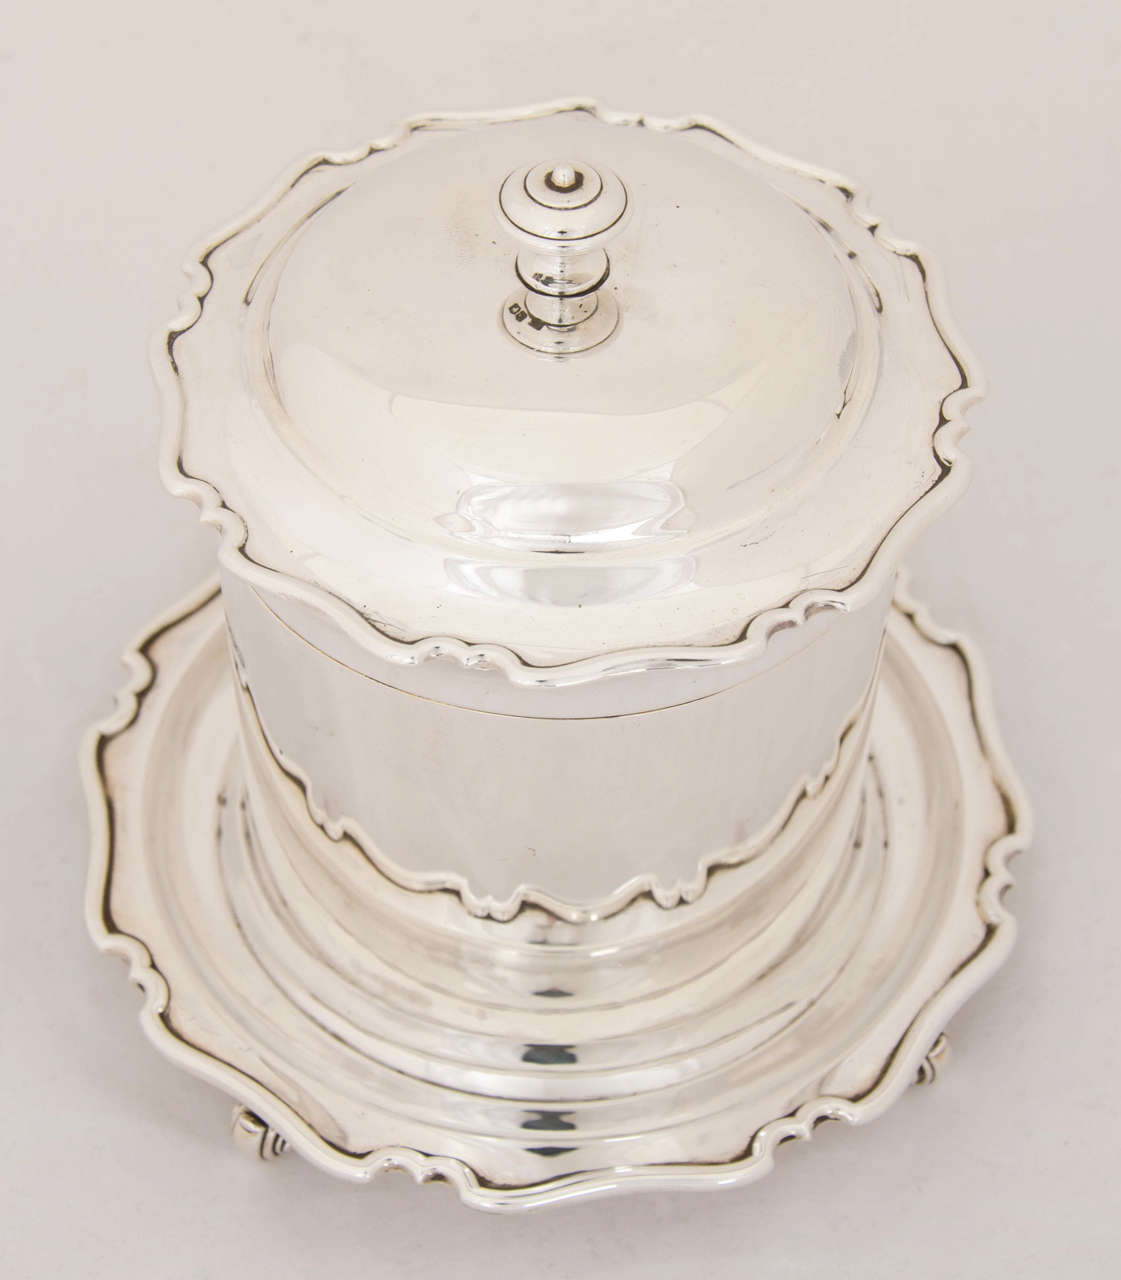 An English sterling silver biscuit box made by H.Atkins, in Sheffield 1925.
Measures: Height 6".